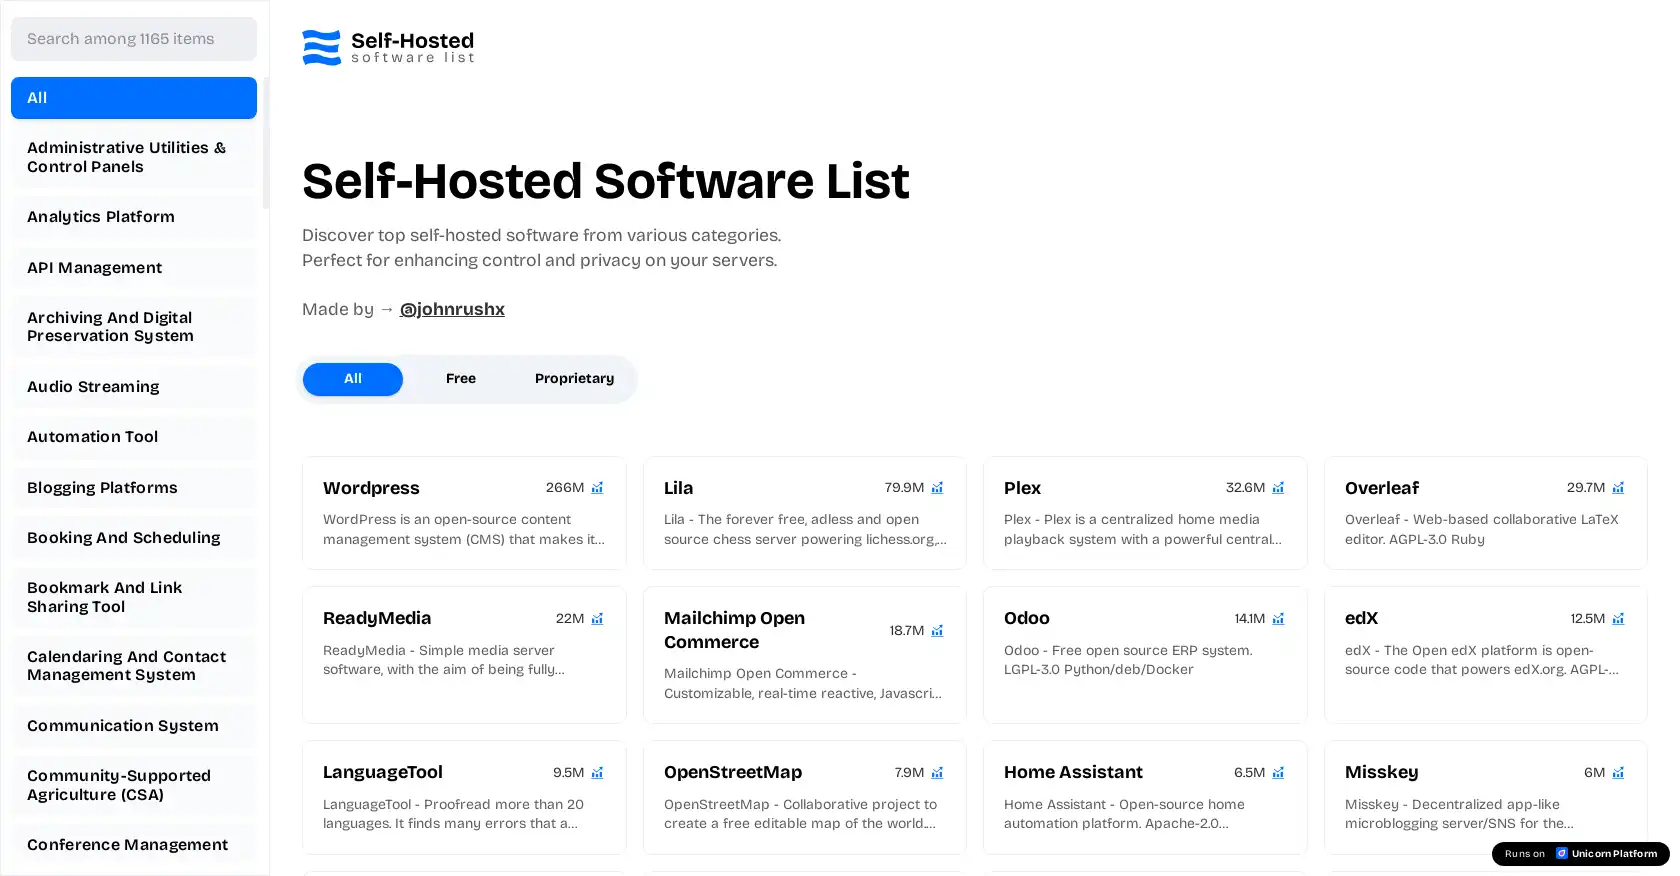 Self-Hosted Software List - AI tool for Private Collaboration, Self-Hosted CMS, Control Your Data, Server Tools